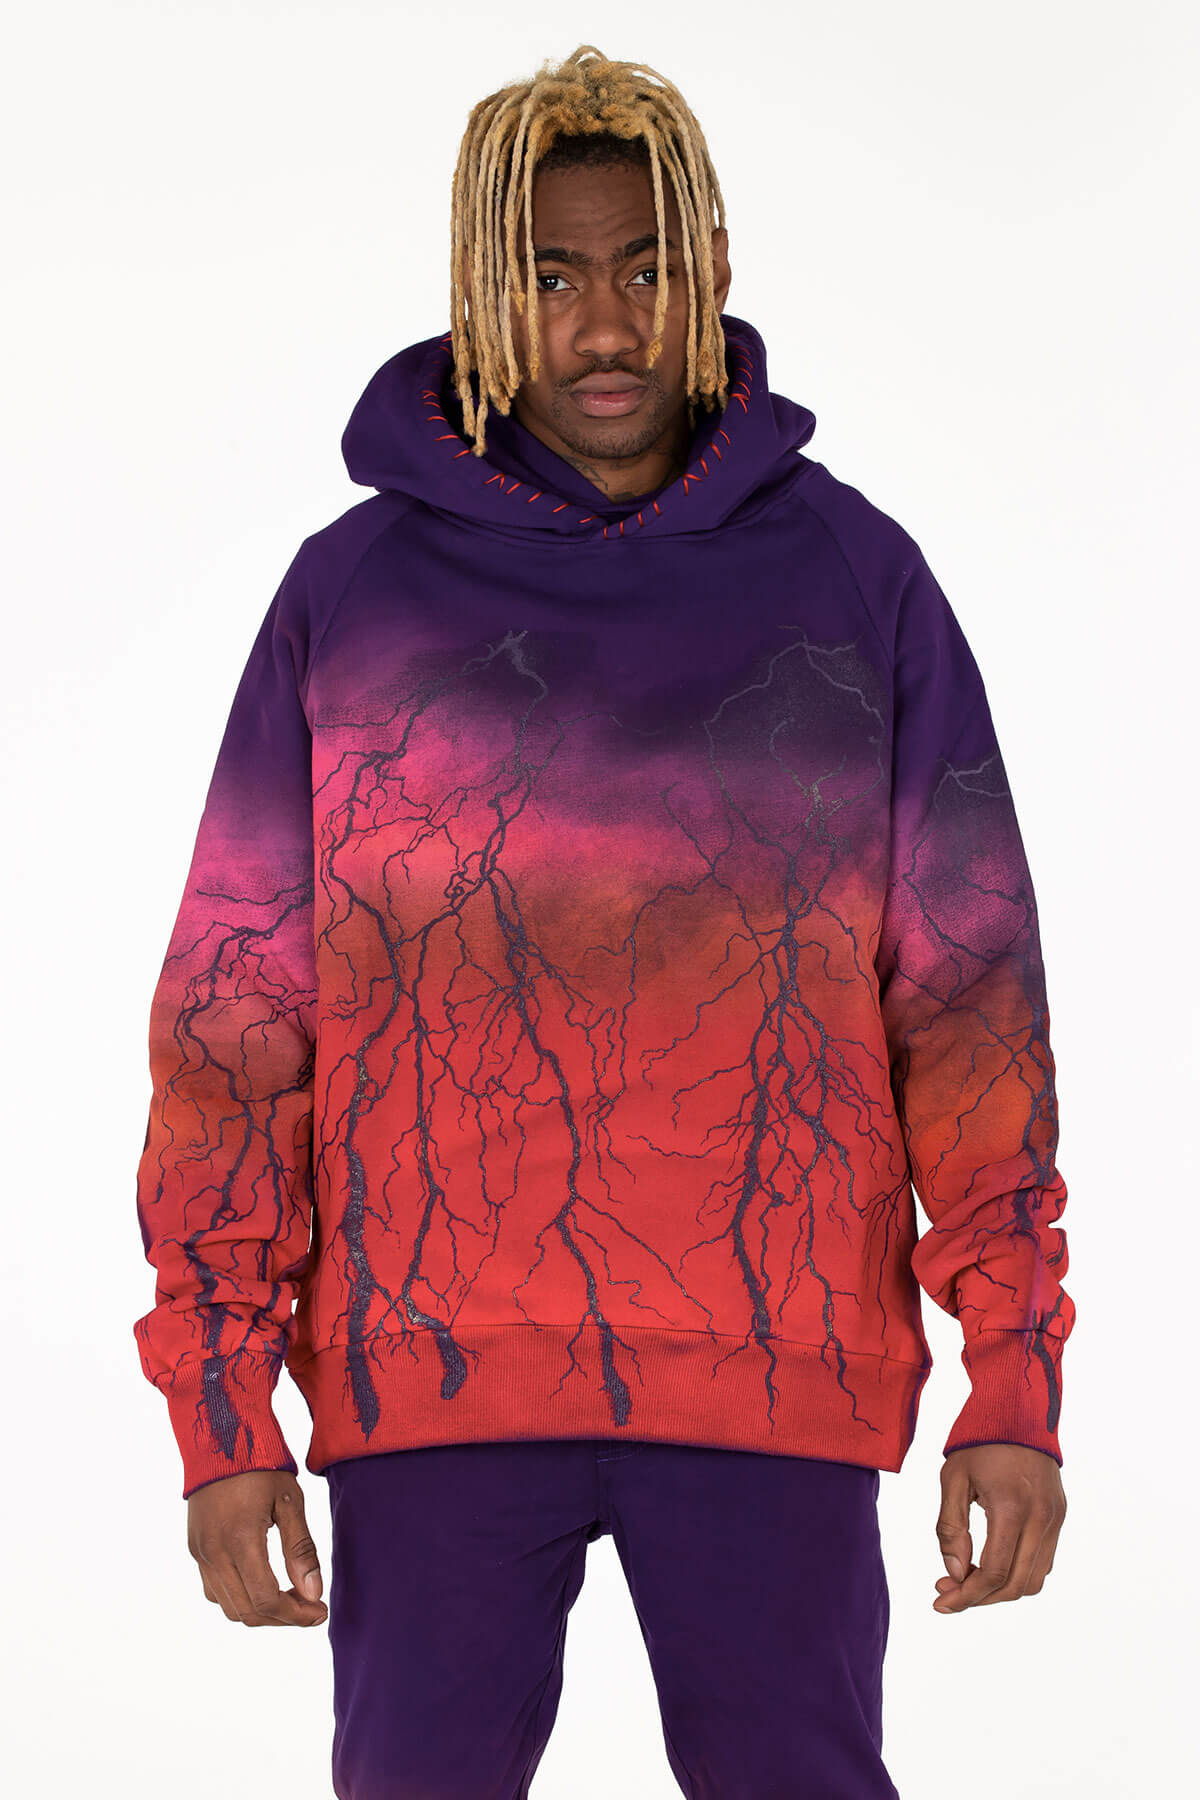 DOUBLE HOODIE HAND SPRAYED AND CRAFTED OMBRE LIGHTNING - MJB